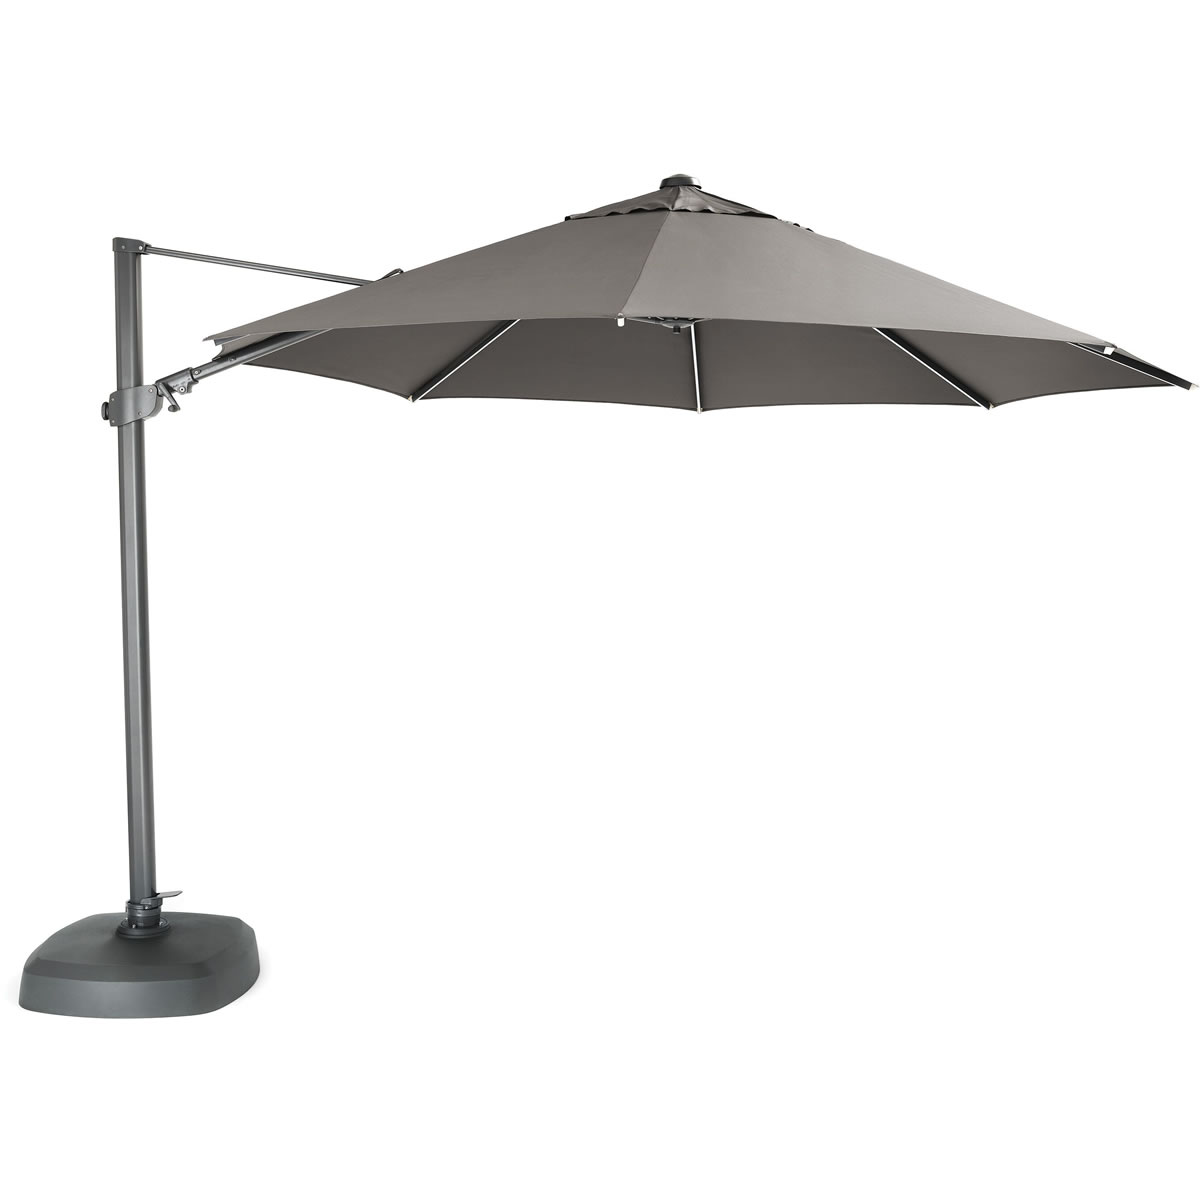 Kettler Arm Parasol with LEDs and Wireless Speaker in Grey - | Garden4Less UK Shop